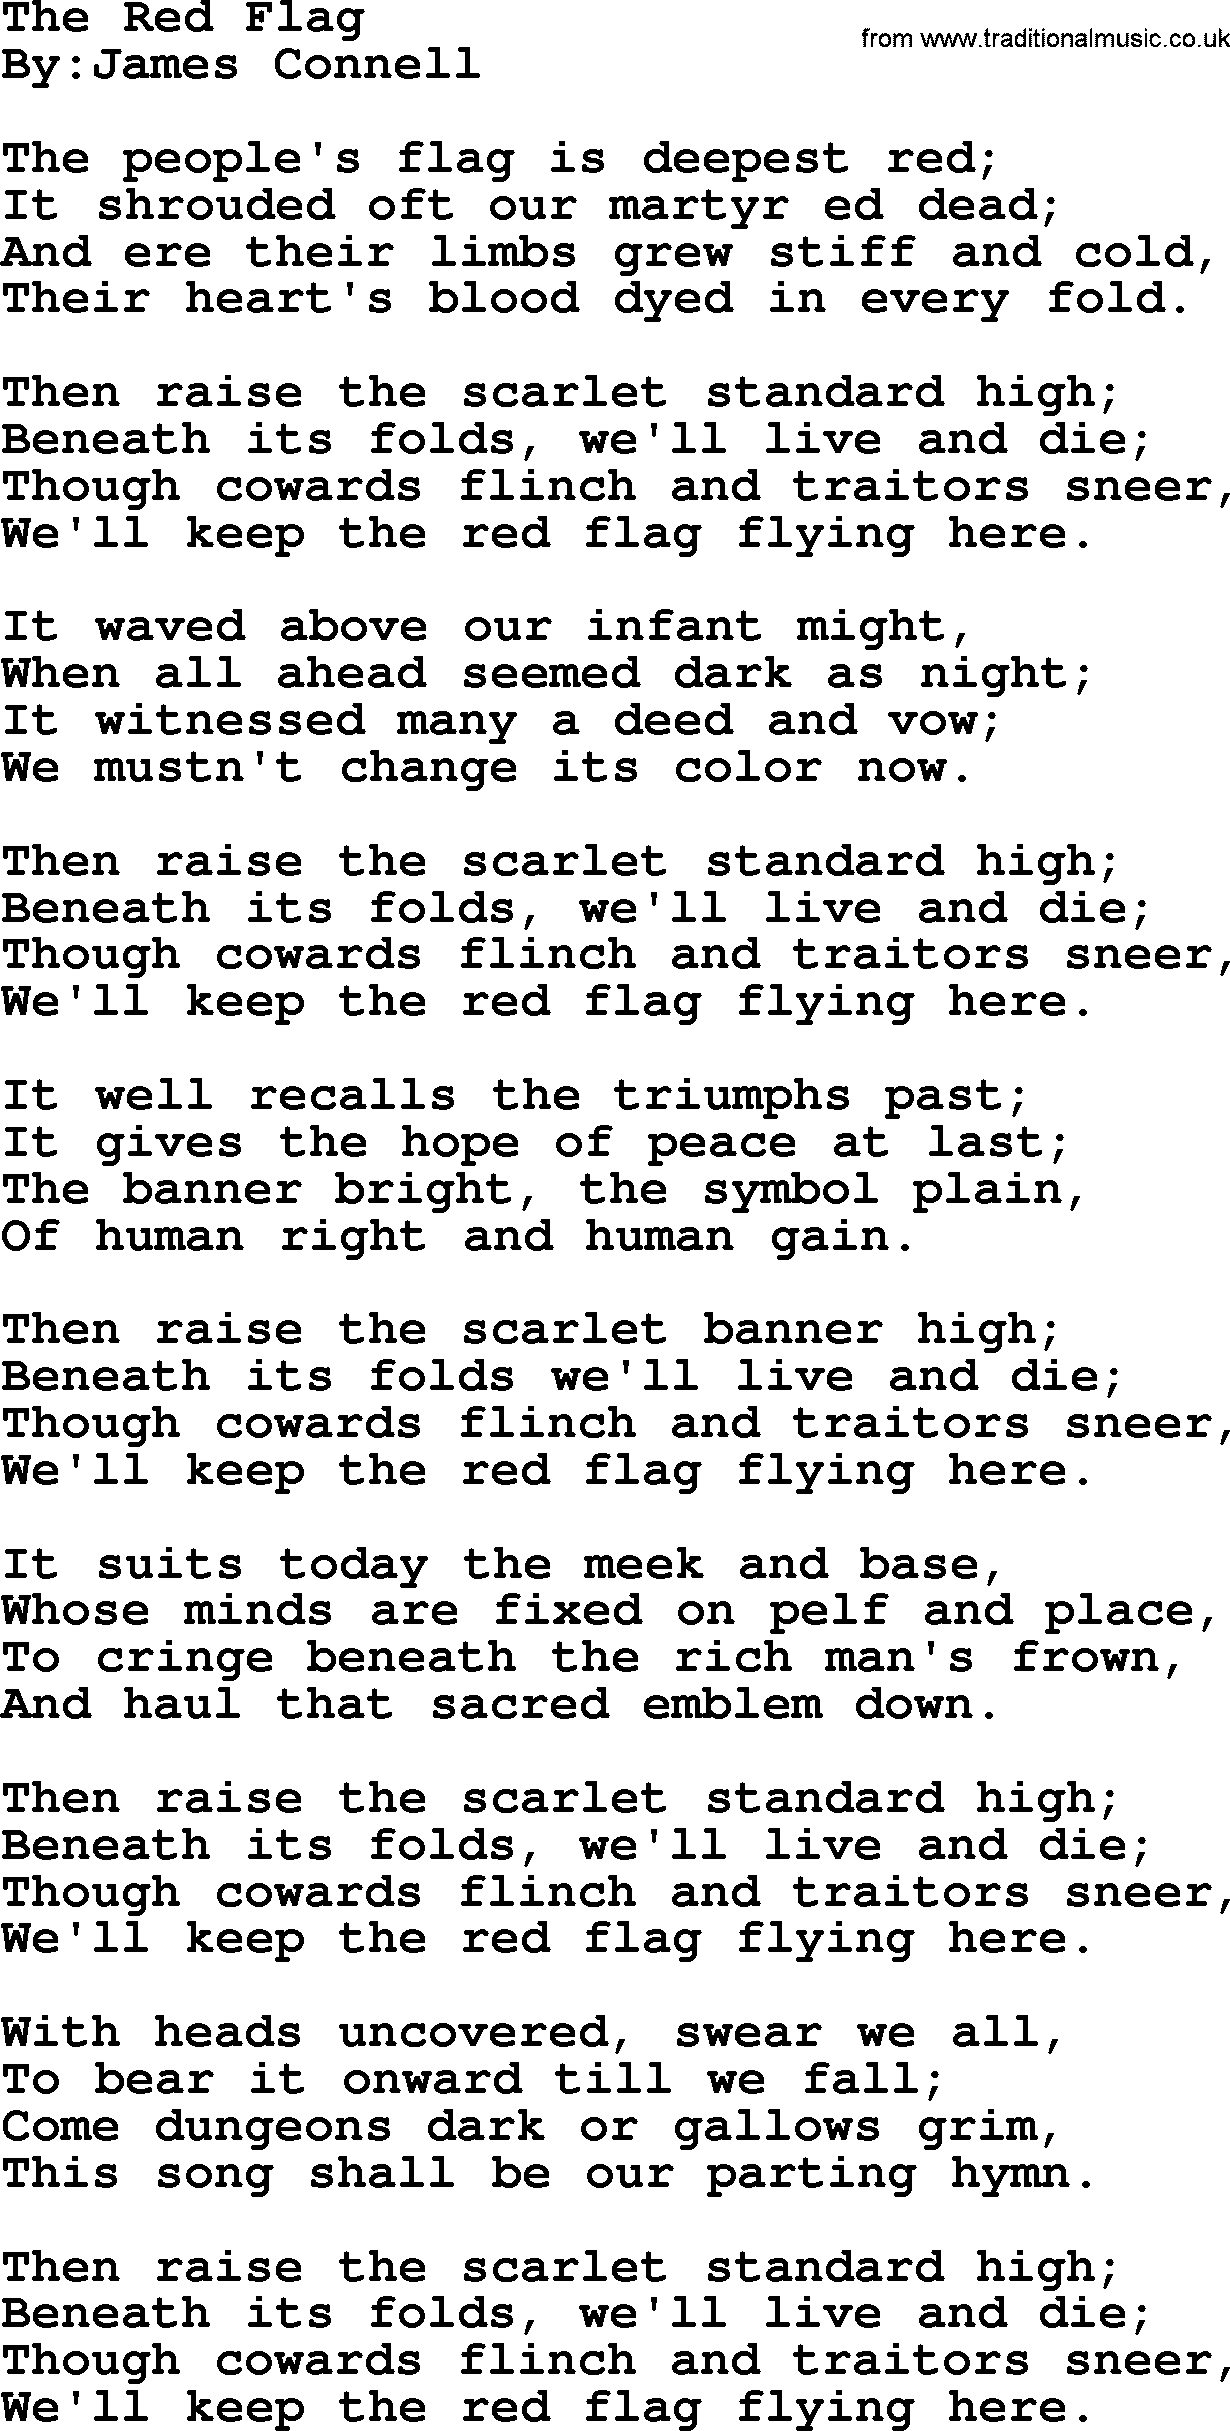 Political, Solidarity, Workers or Union song: The Red Flag, lyrics